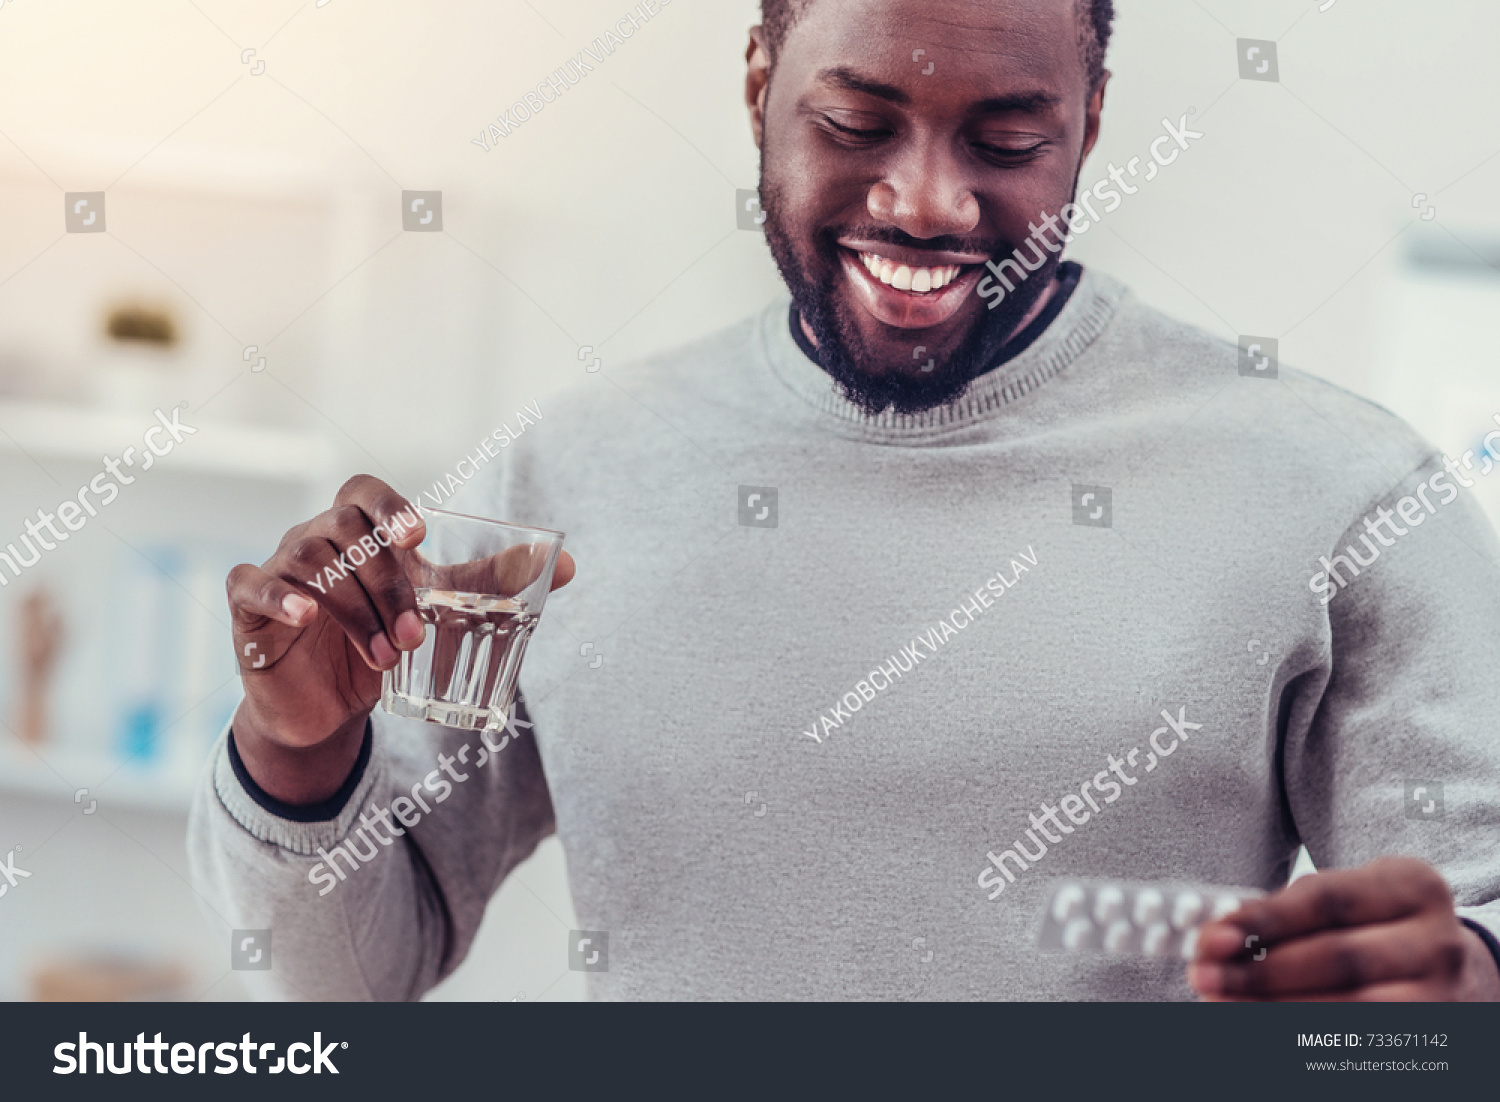 Positive minded African American man taking medication #733671142